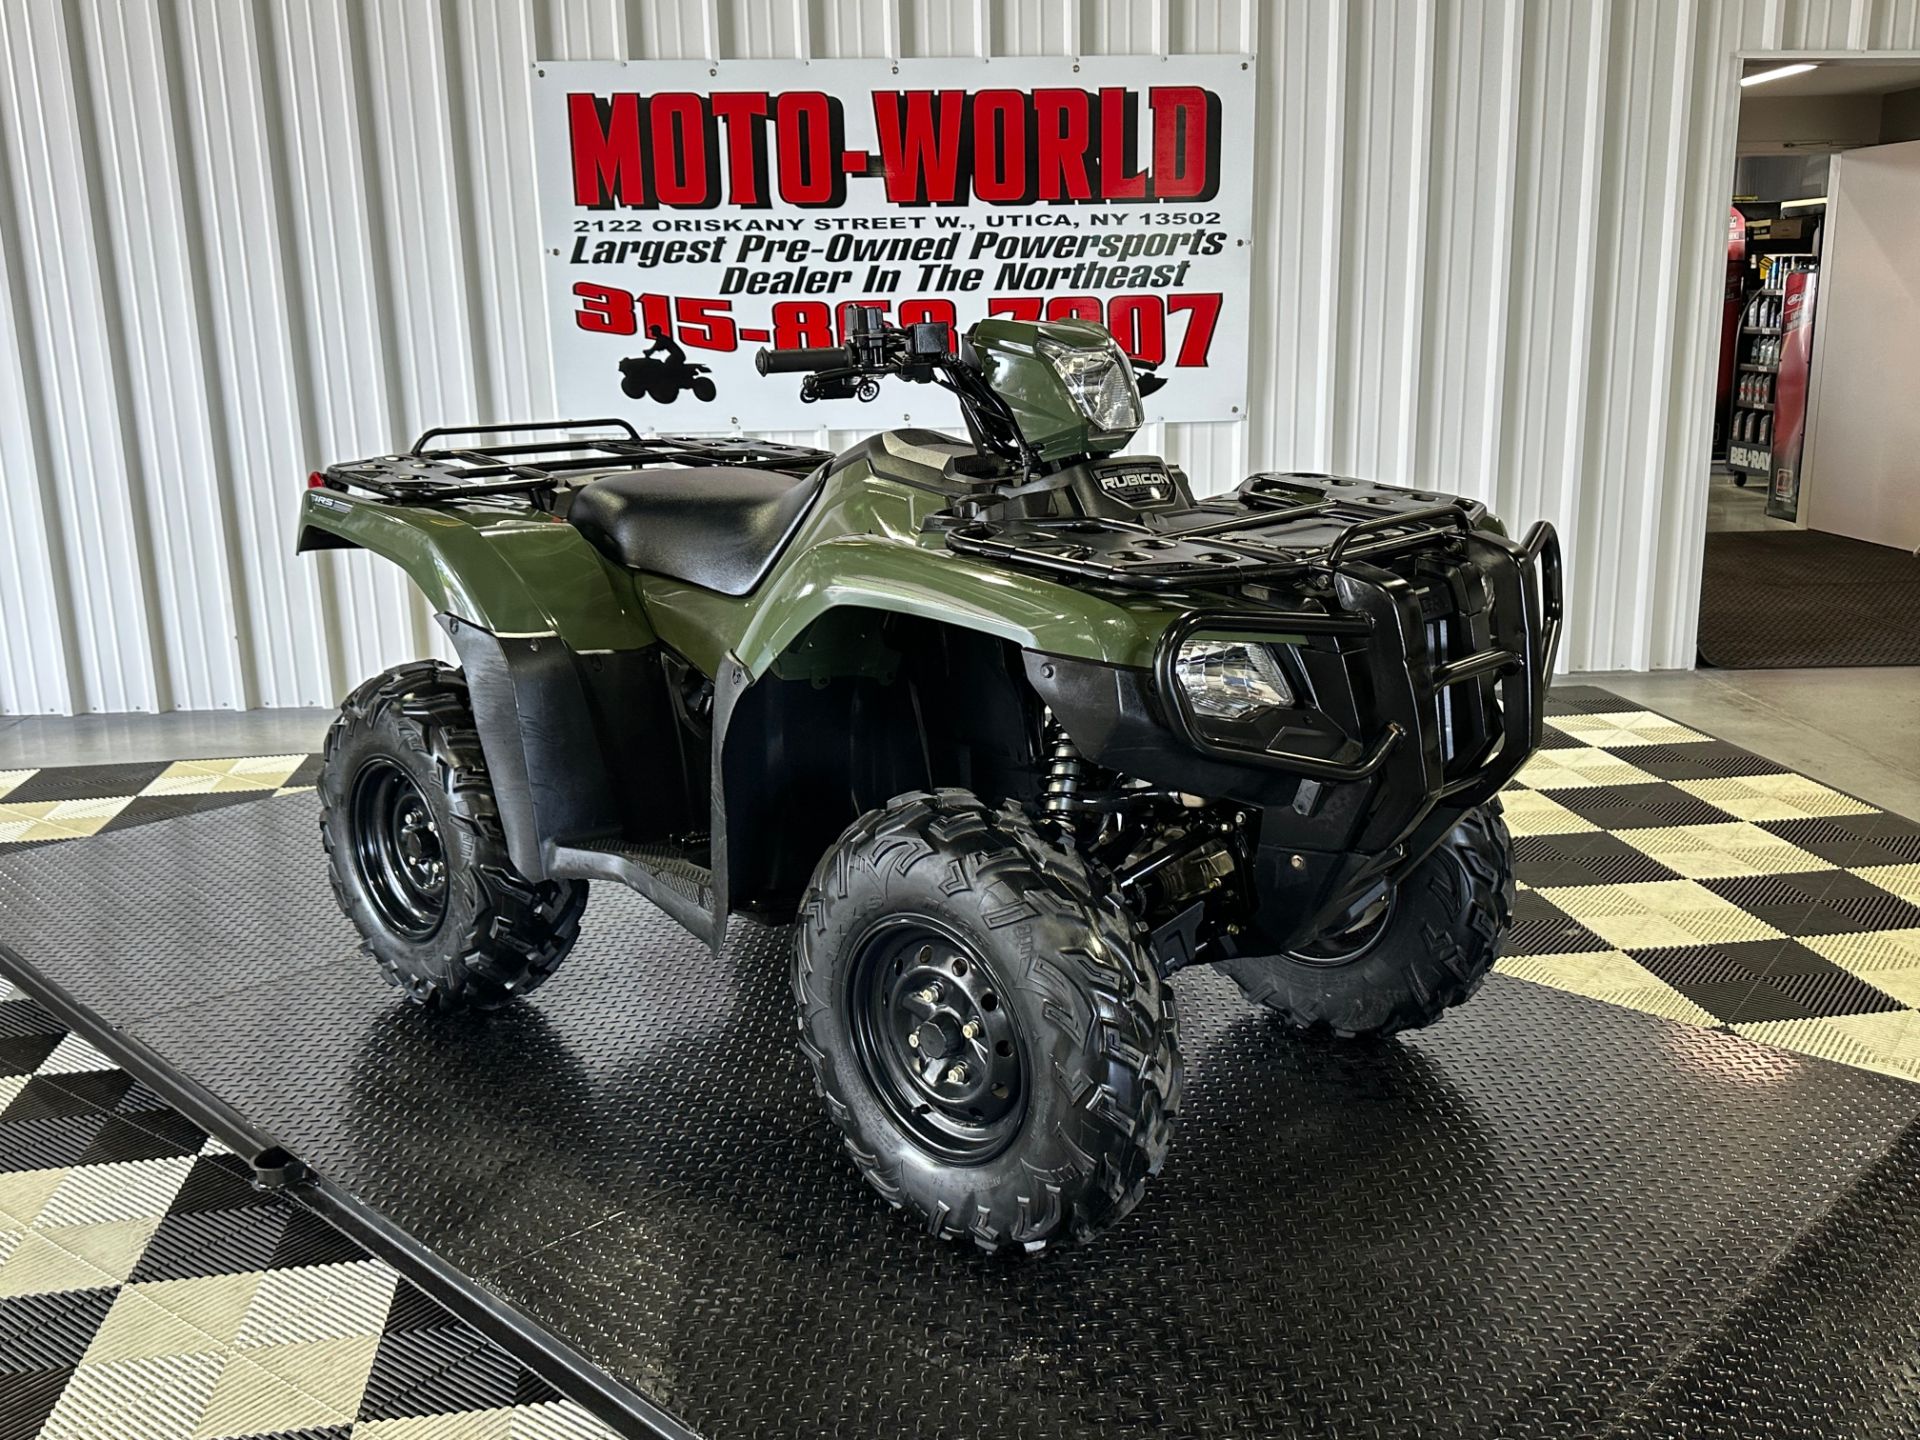 2021 Honda FourTrax Foreman Rubicon 4x4 Automatic DCT EPS in Utica, New York - Photo 12